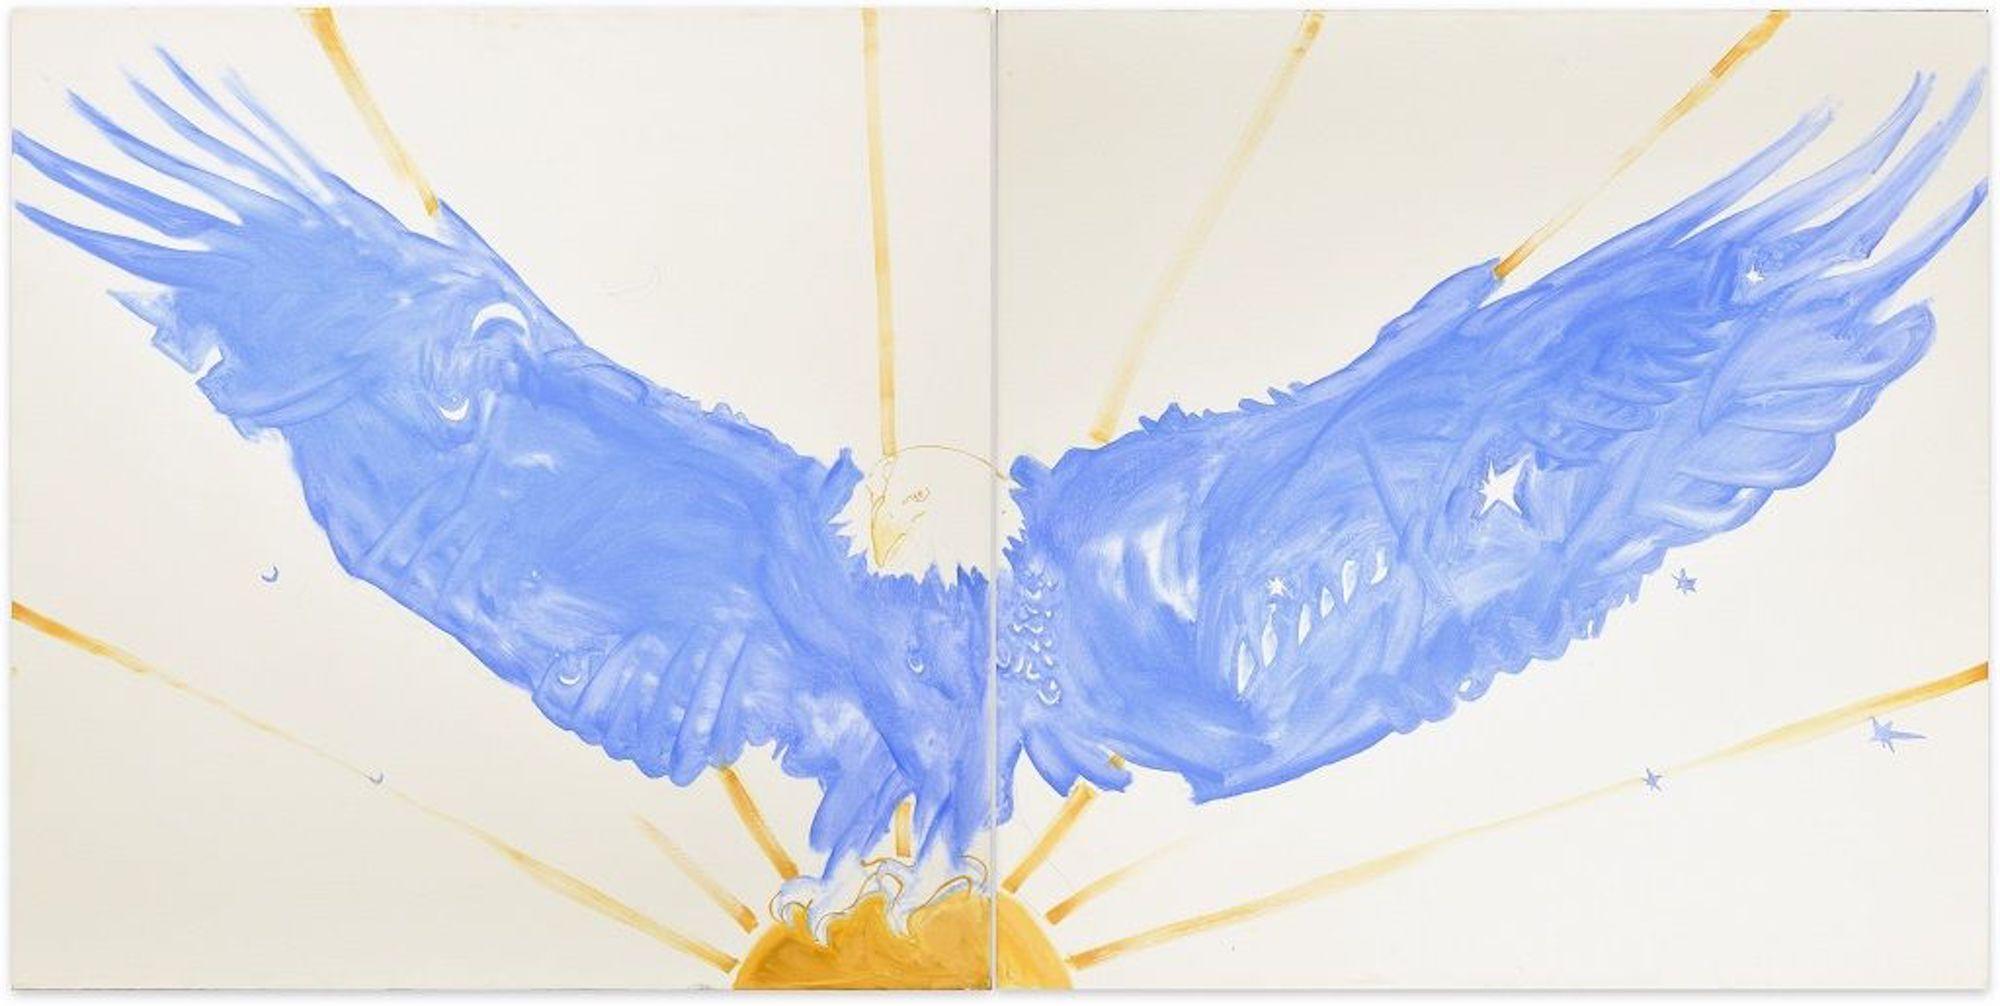 Eagle is an original artwork realized in 2019 by Anastasia Kurakina.

Original oil painting on canvas. The artwork is characterized by two single canvases (100 x 100 cm each one) that form a diptych. 

Signature and date on the back.

In excellent